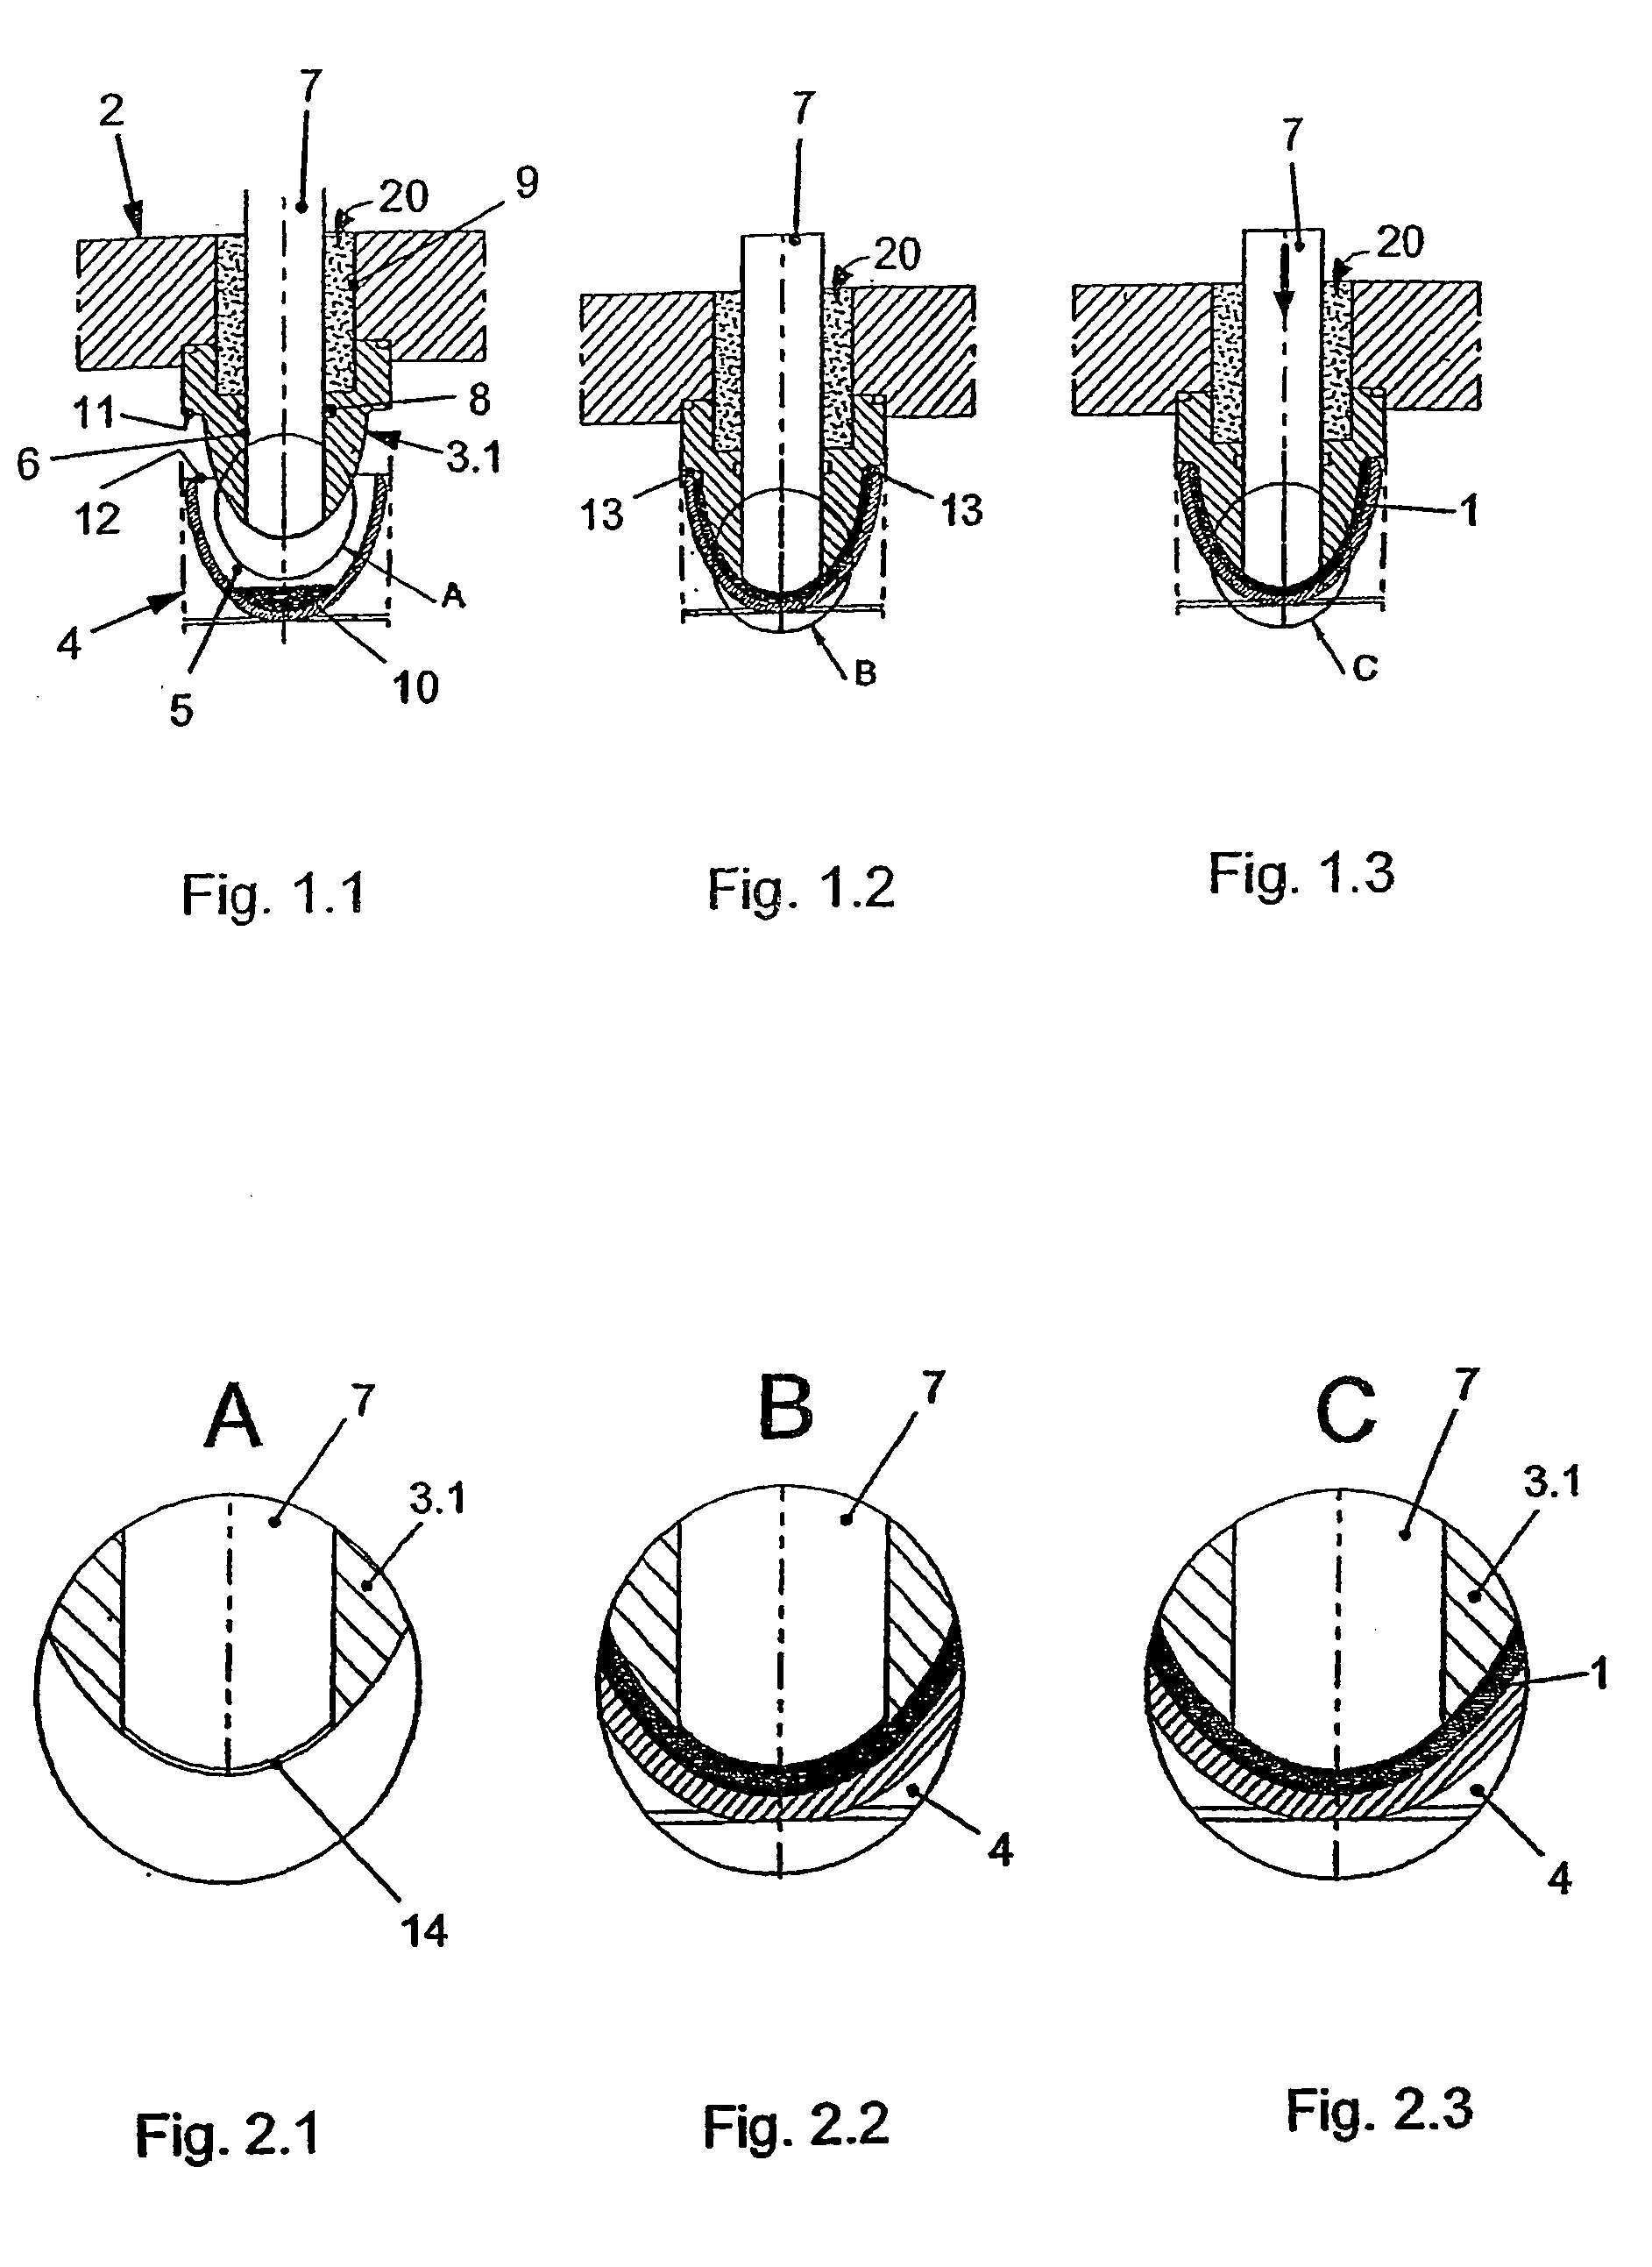 Method and device for producing confectionary products